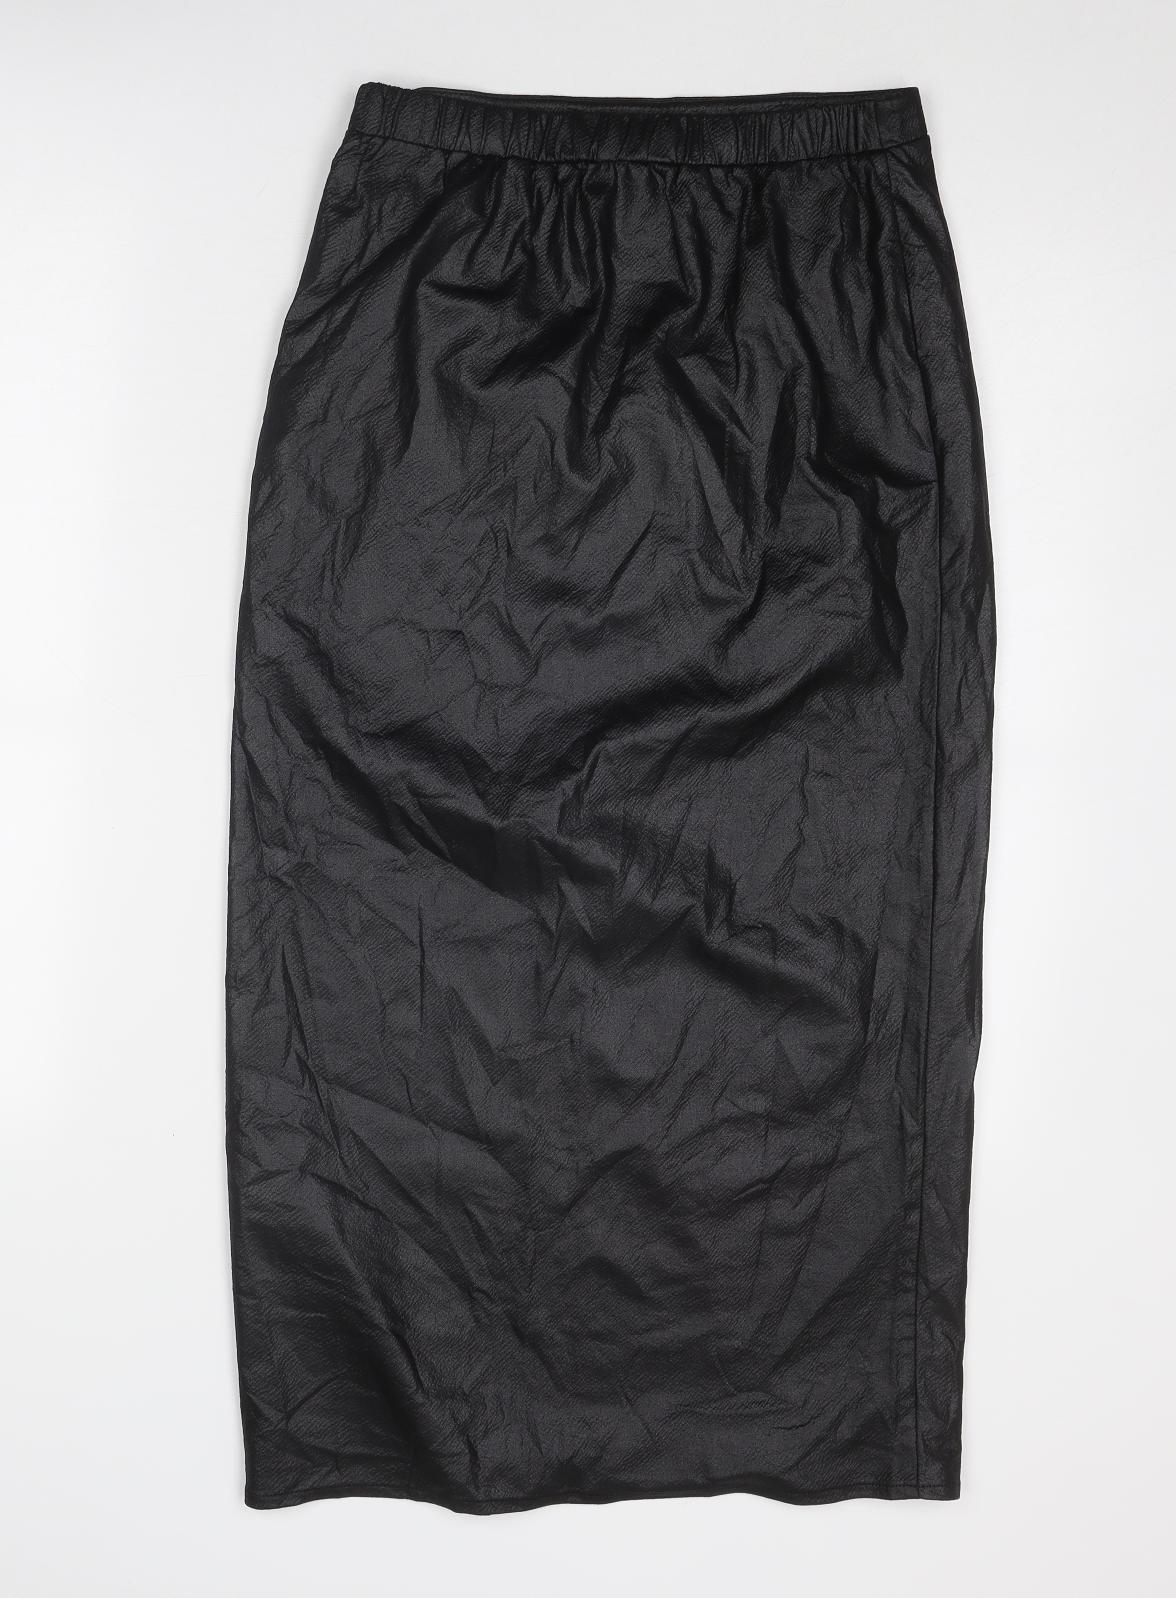 ASOS Womens Black Polyester A-Line Skirt Size 10